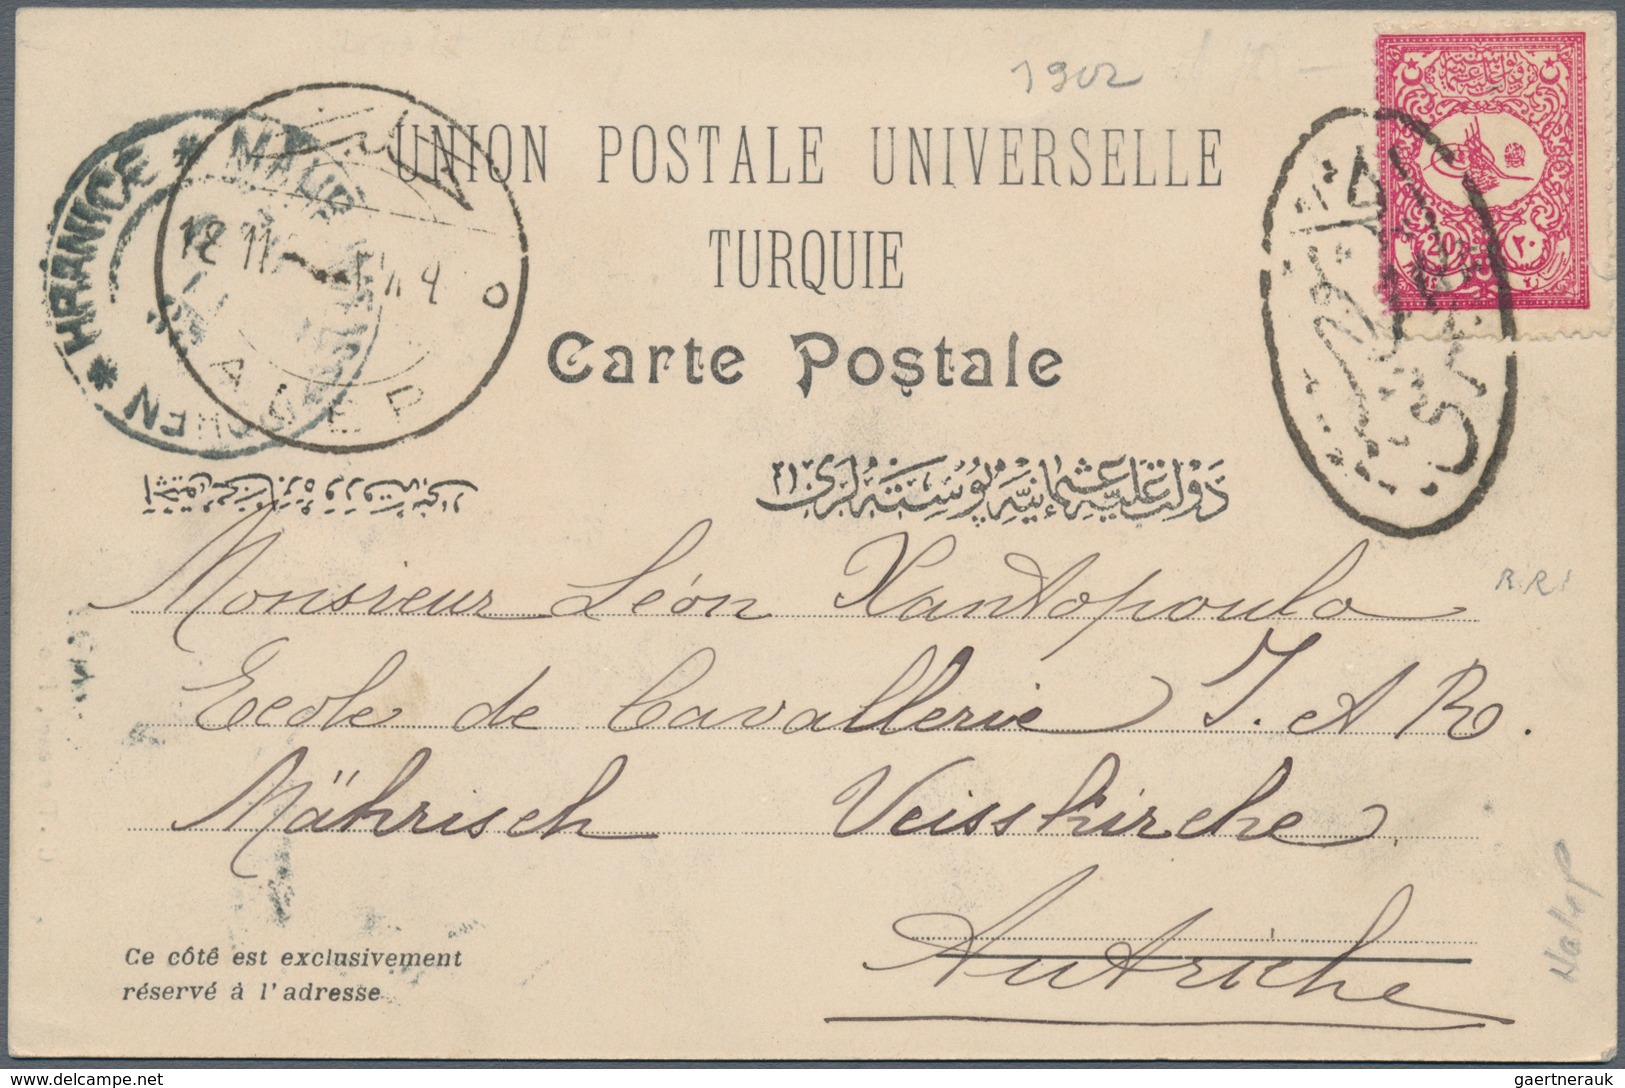 Türkei: 1900/1940 (ca.), 75 envelopes and postal stationeries, many of them used in today's Syria, w